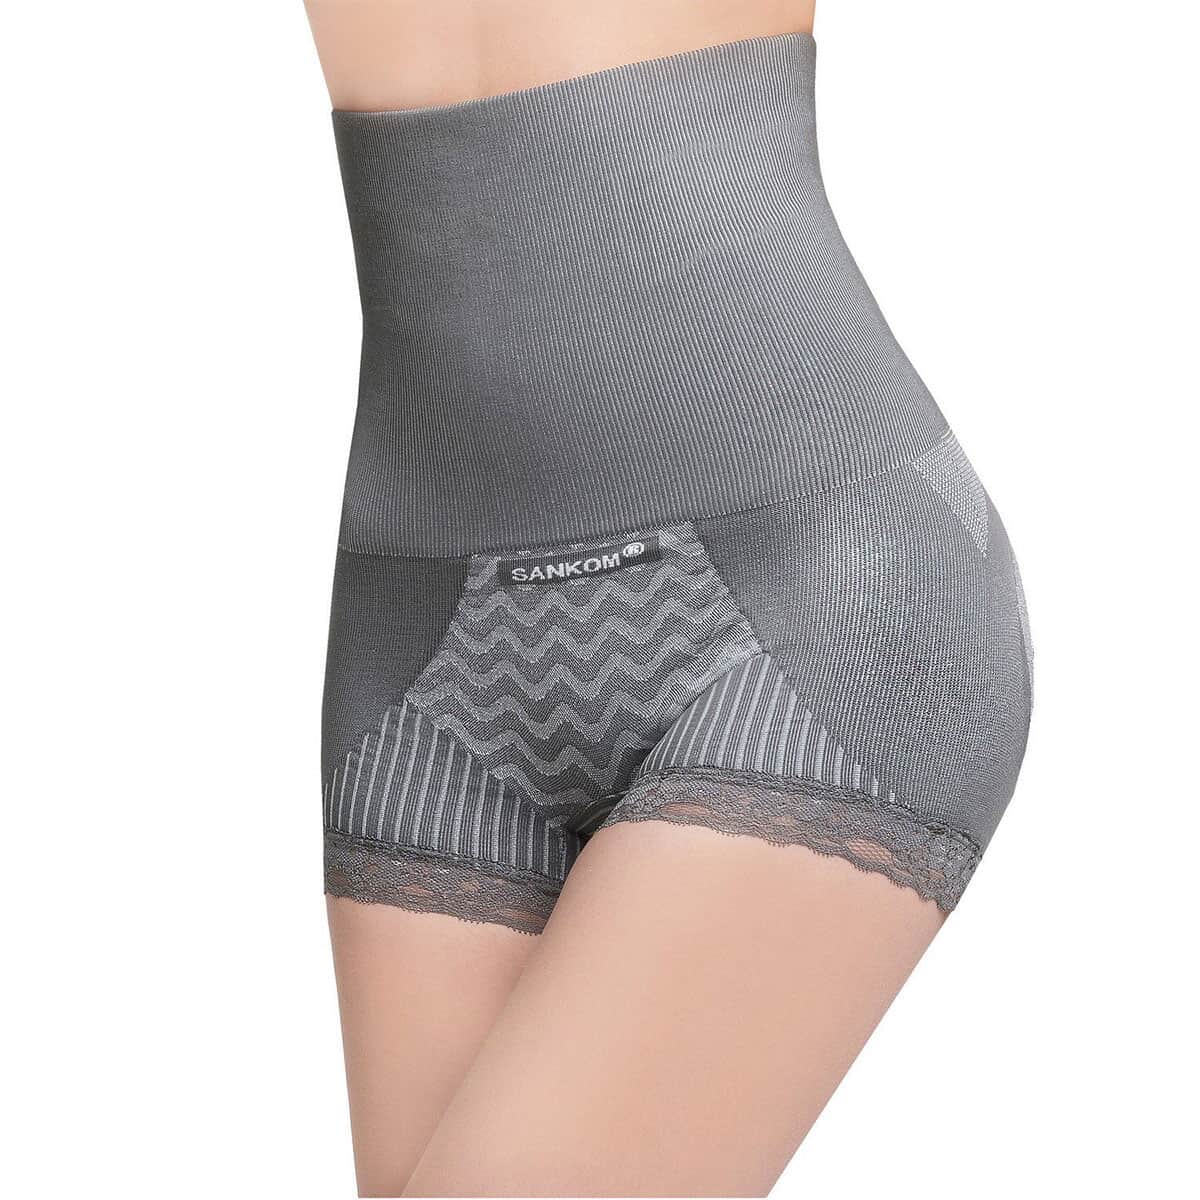 SANKOM Patent Lace Brief Shaper with Bamboo Fibers (L/XL, Gray) image number 0